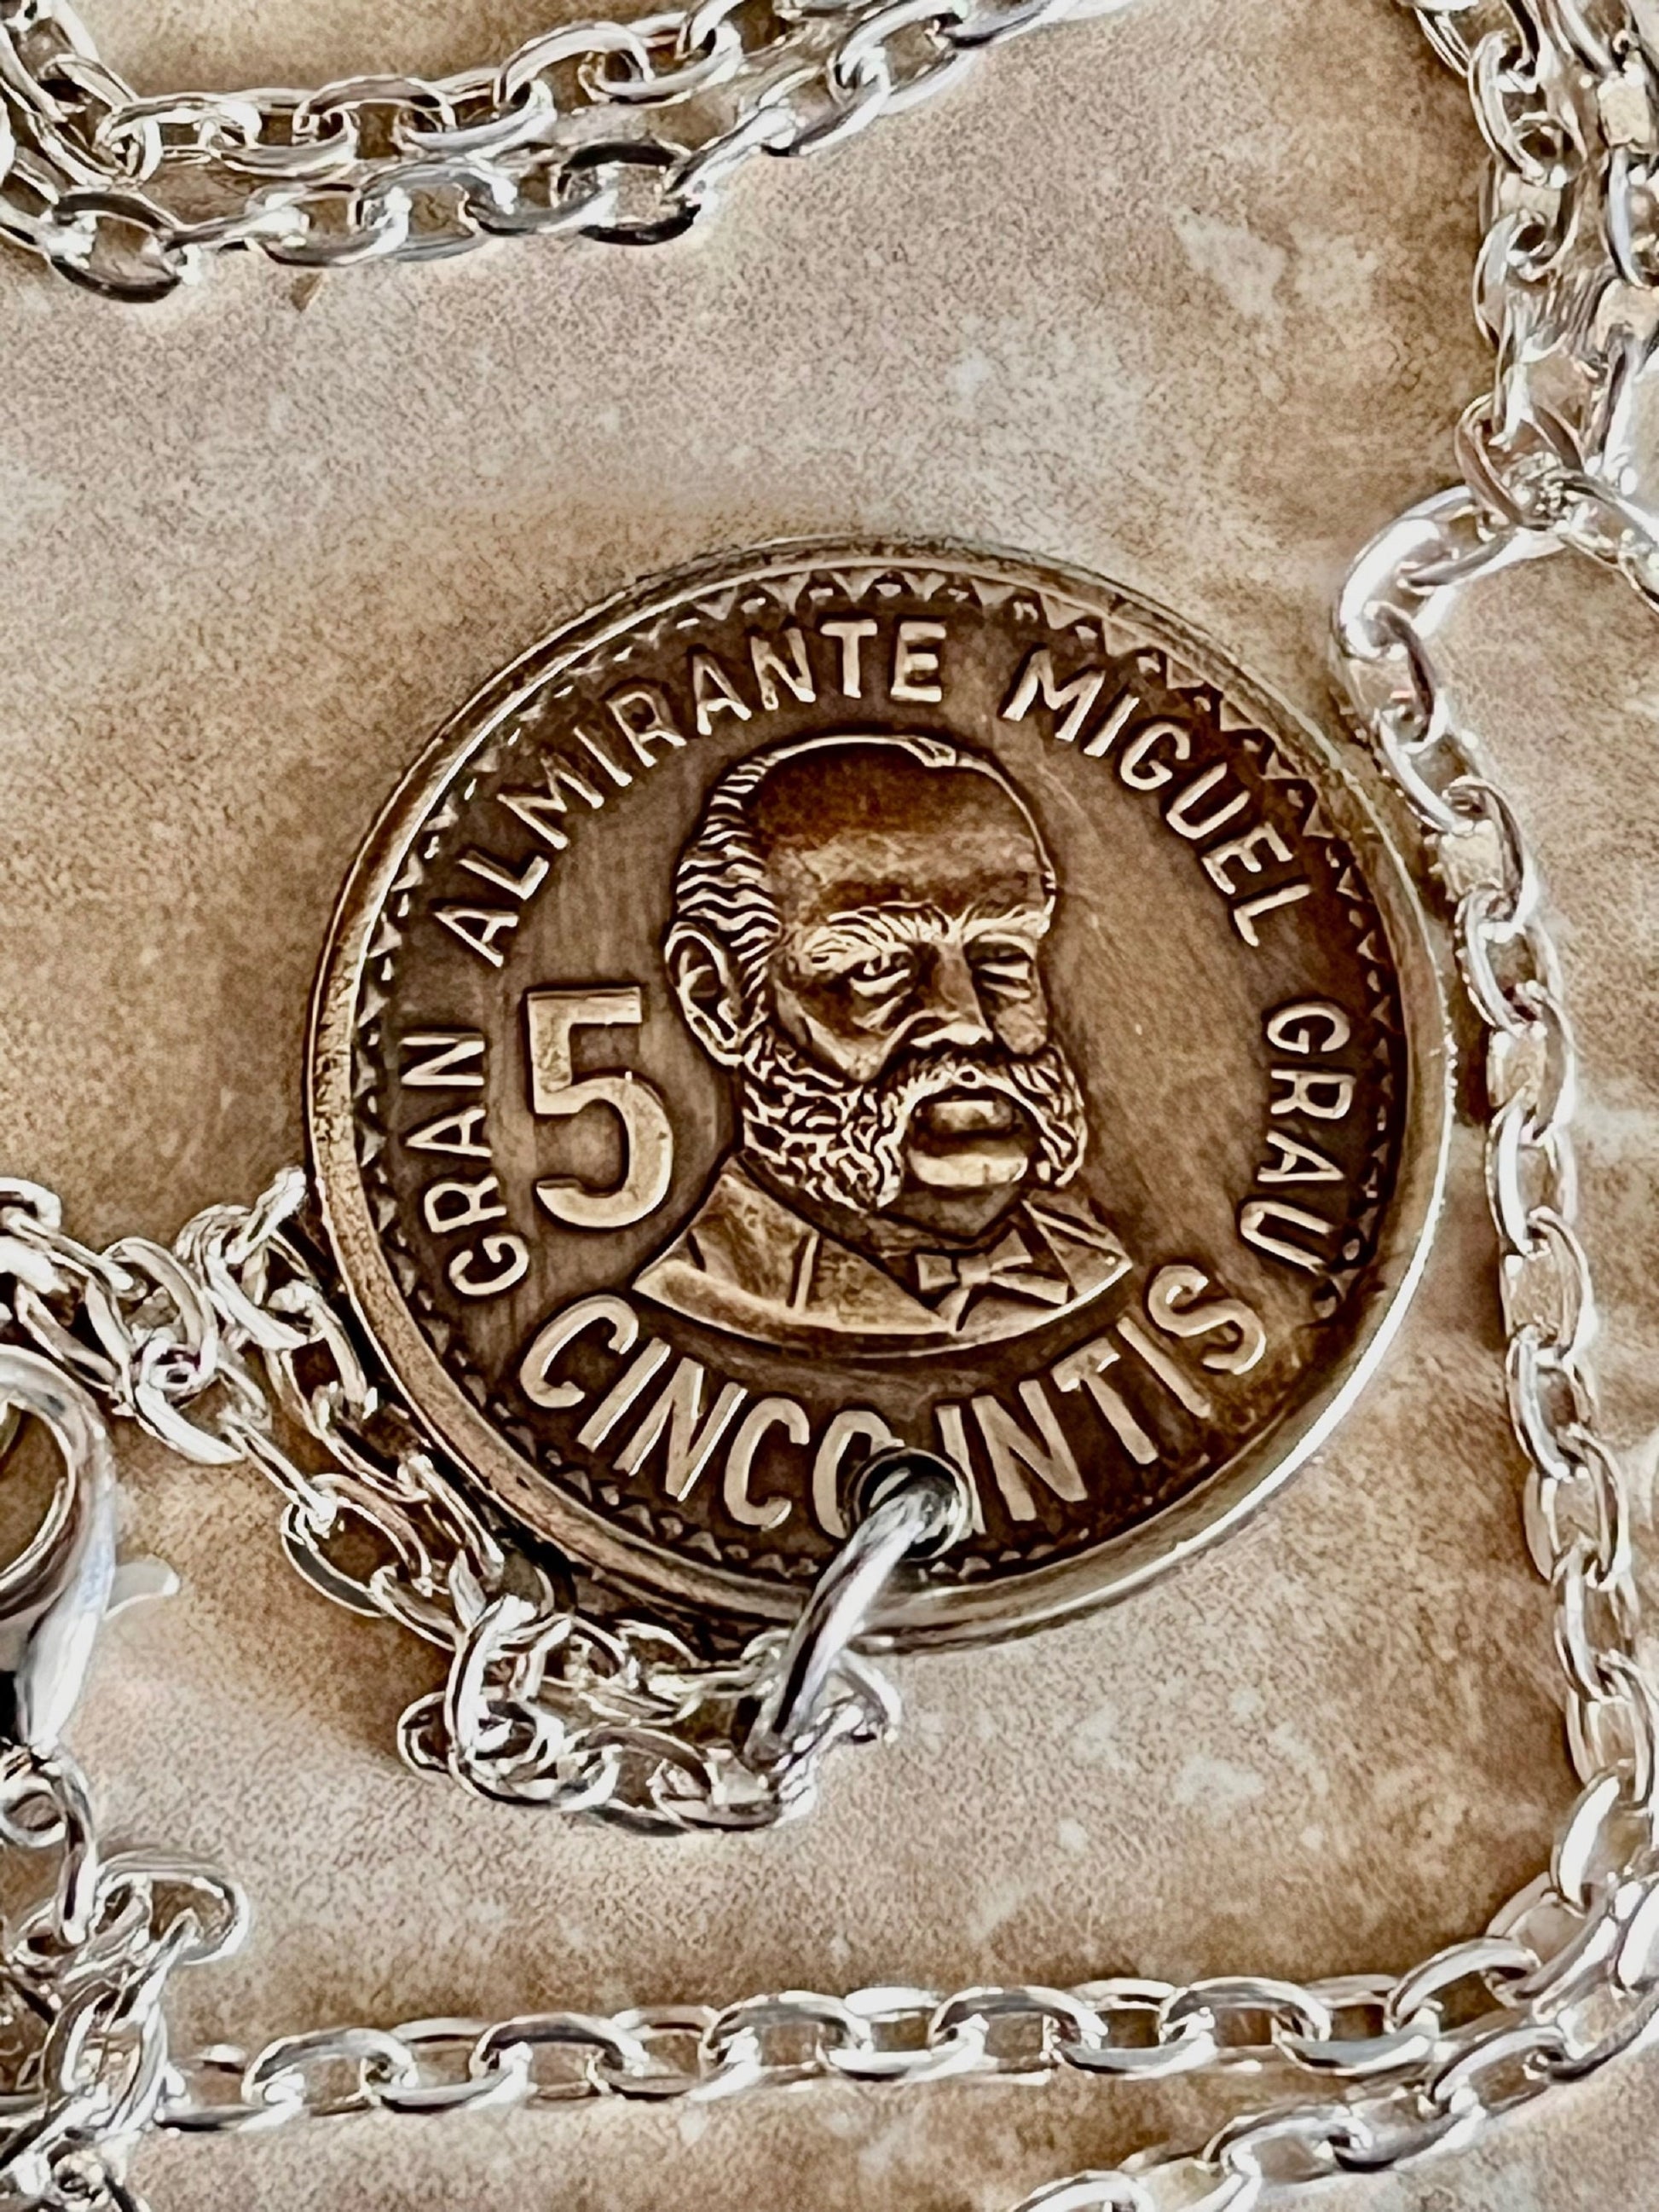 Peru Coin Pendant Peruvian Cinco Intis Personal Necklace Old Vintage Handmade Jewelry Gift Friend Charm For Him Her World Coin Collector